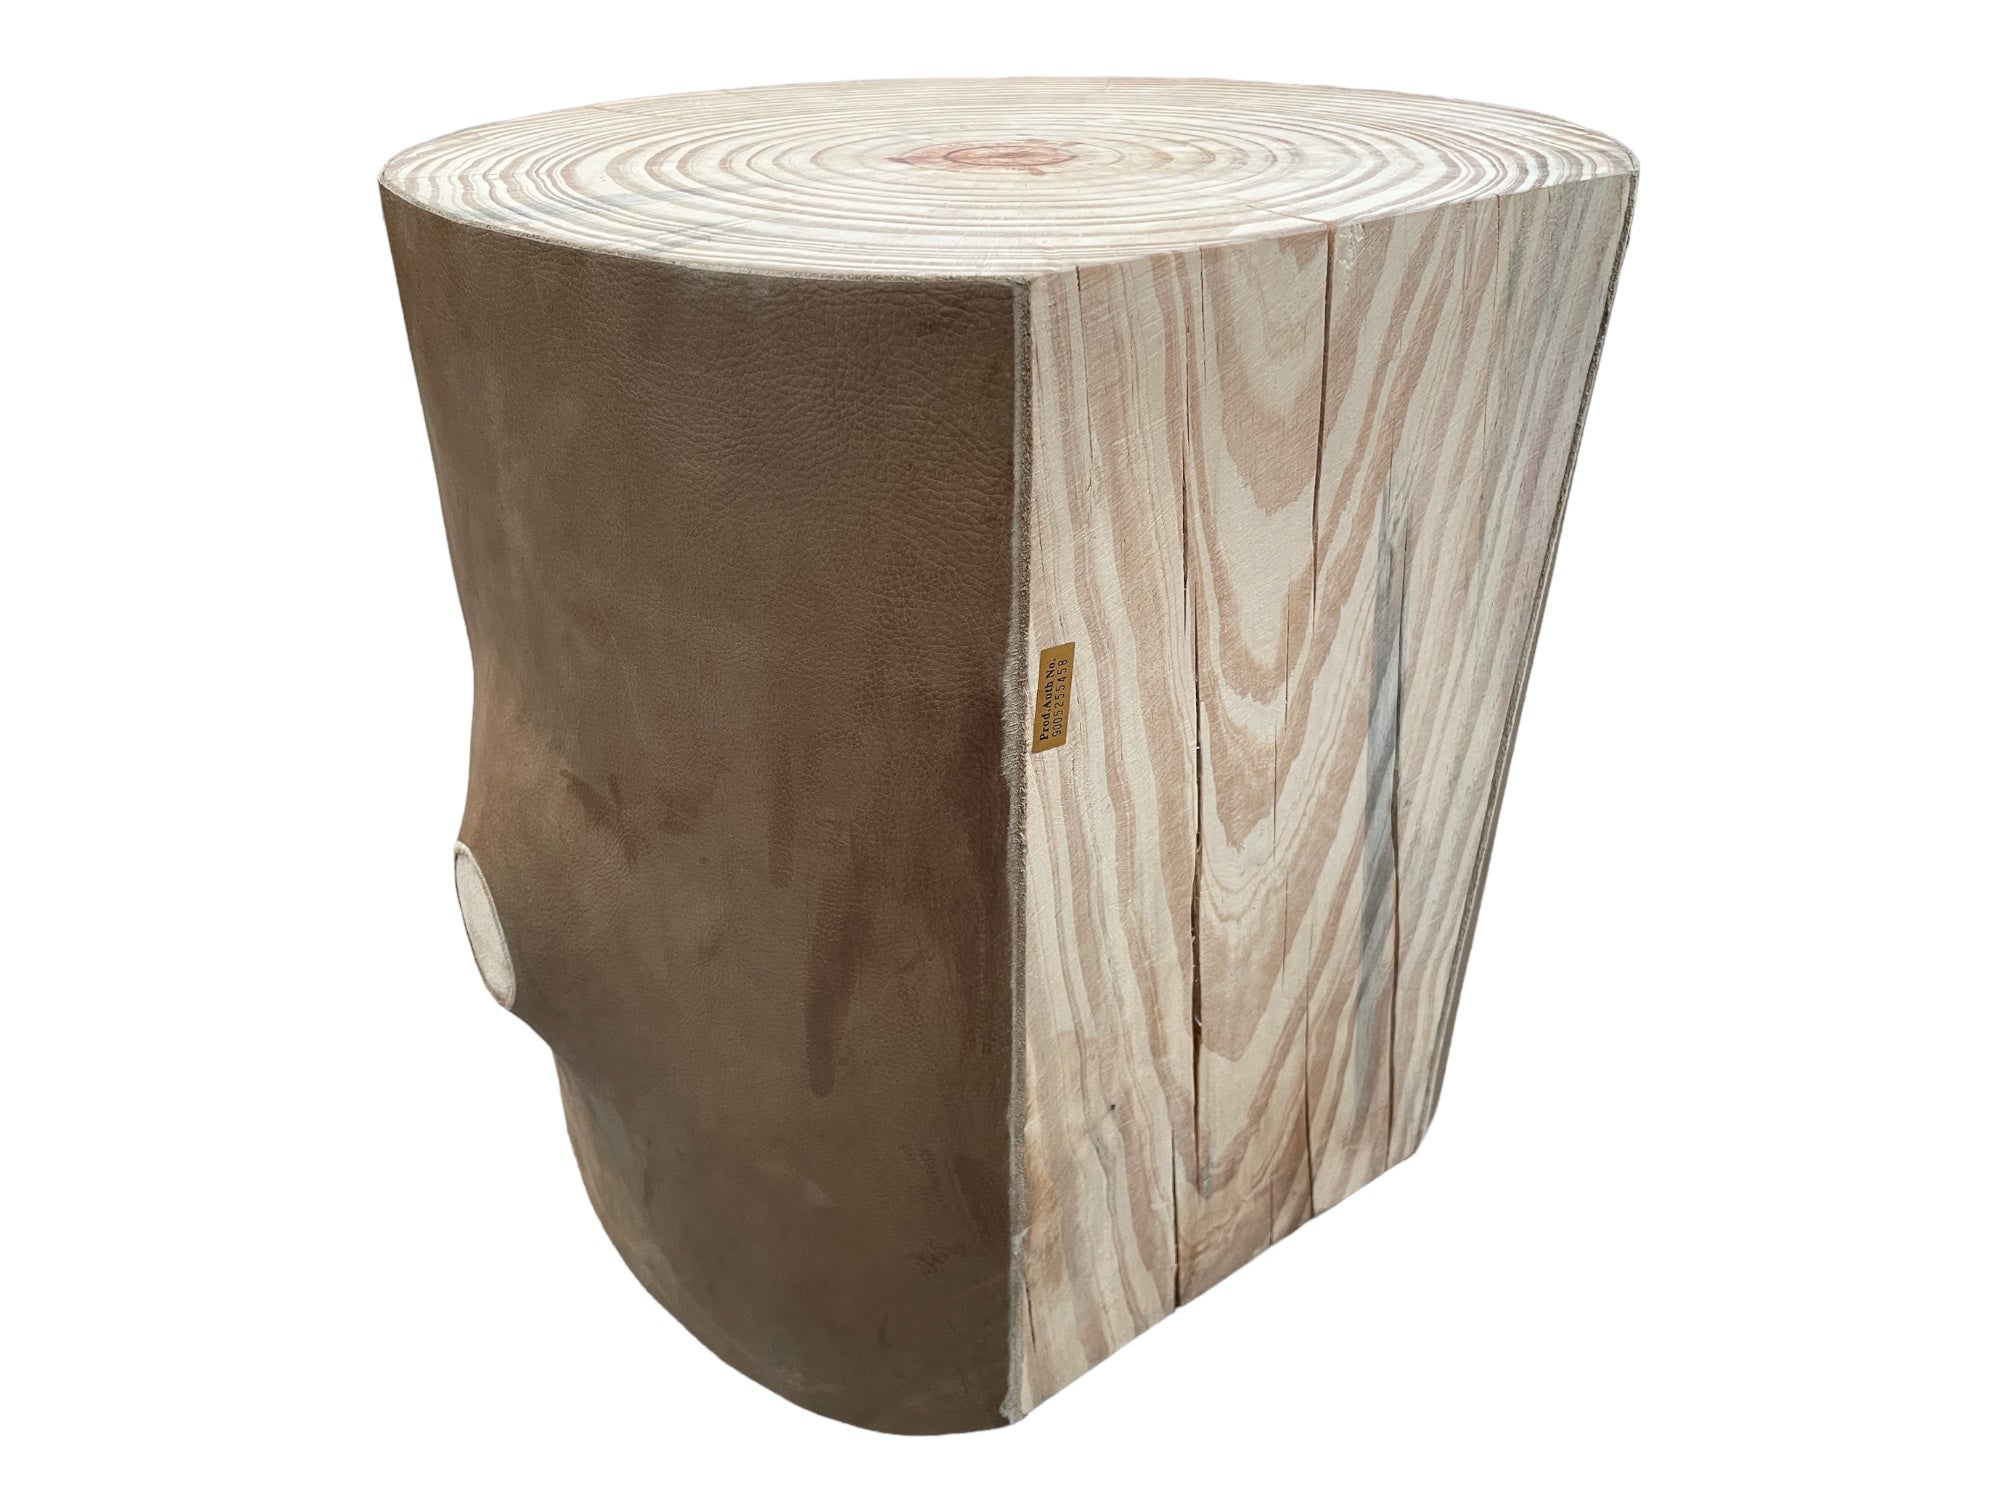 Logglove side table - Clearance Item